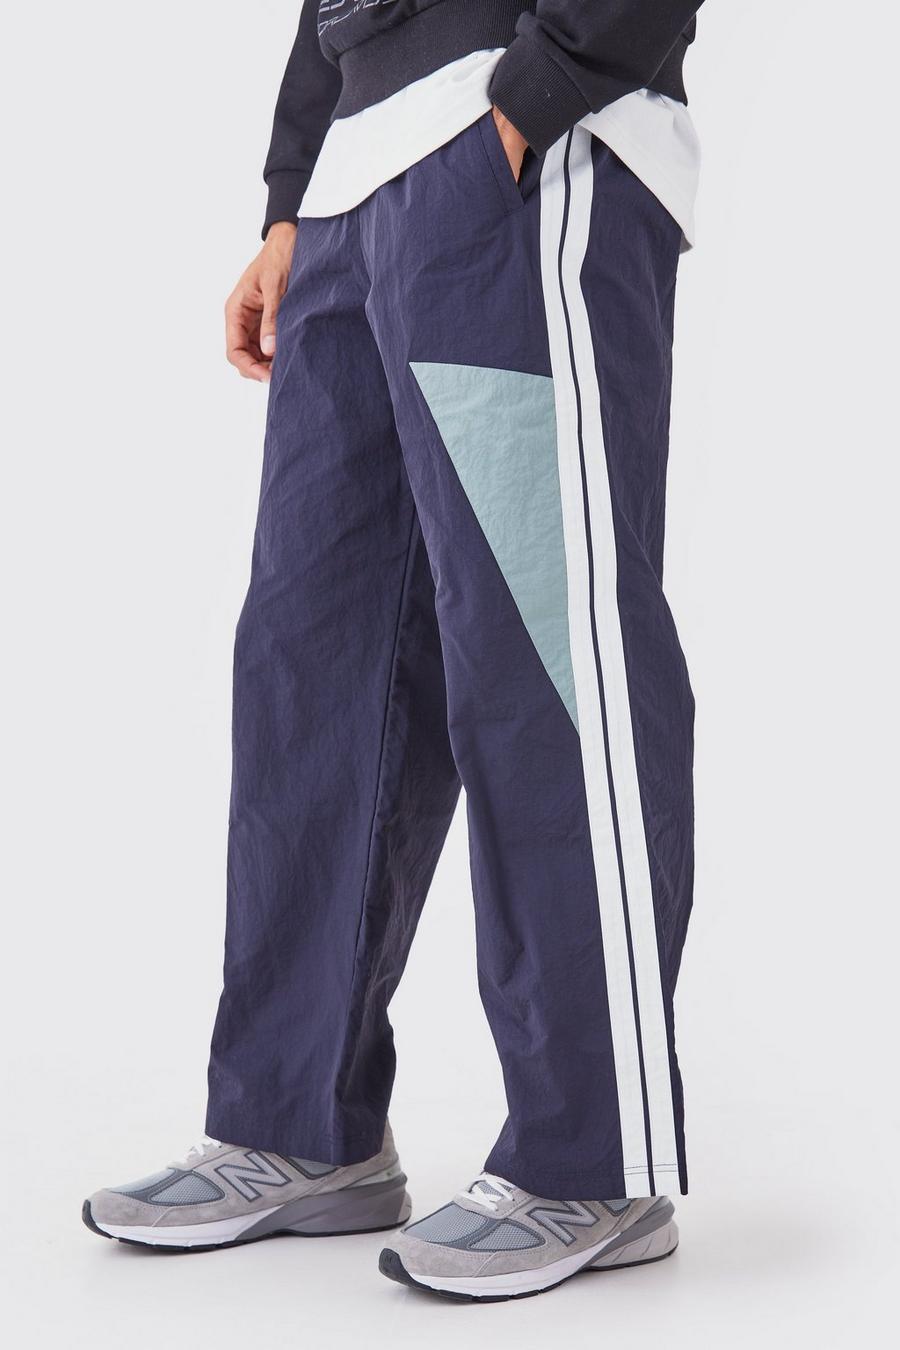 Navy Pannelled Wide Leg Track Pants